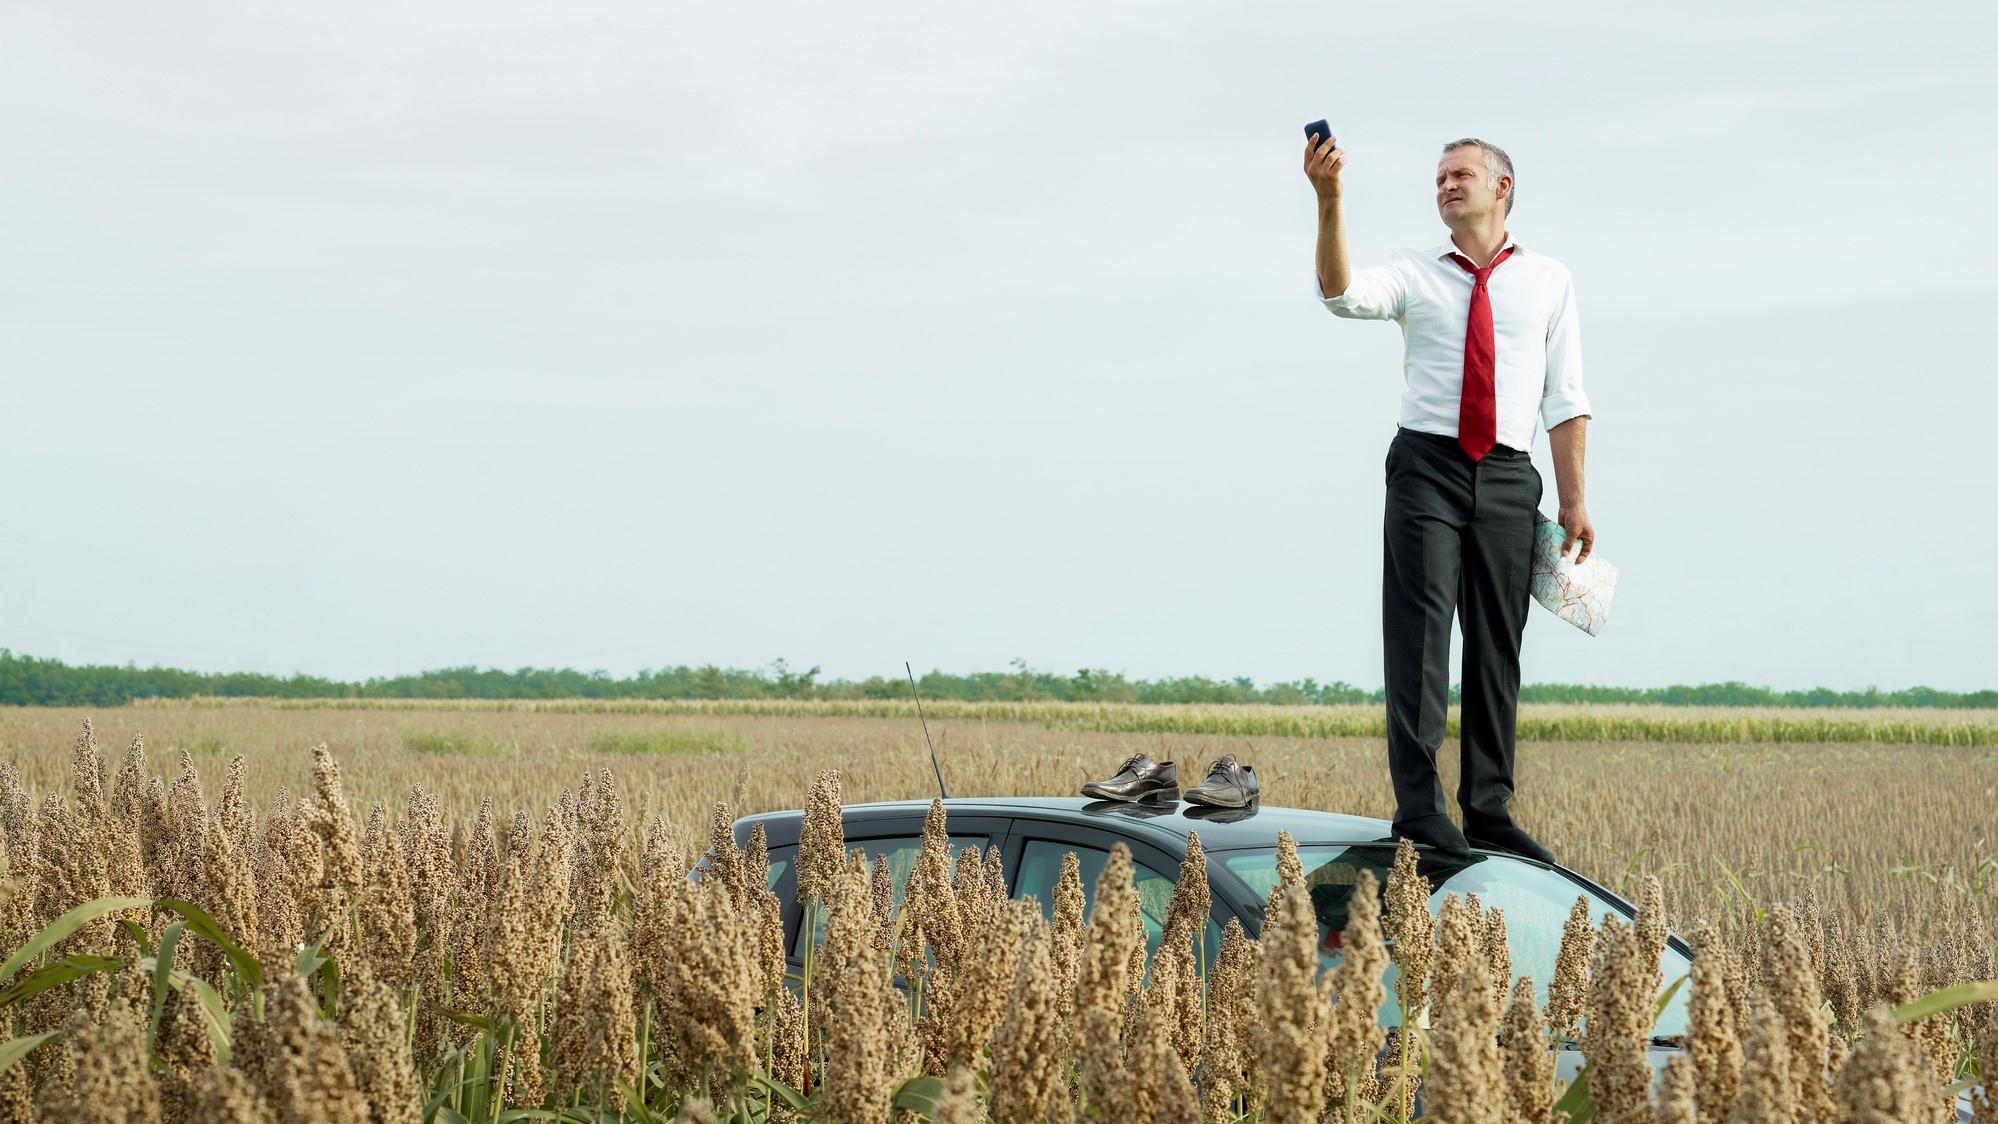 VoIP phone user stands on car for network signal